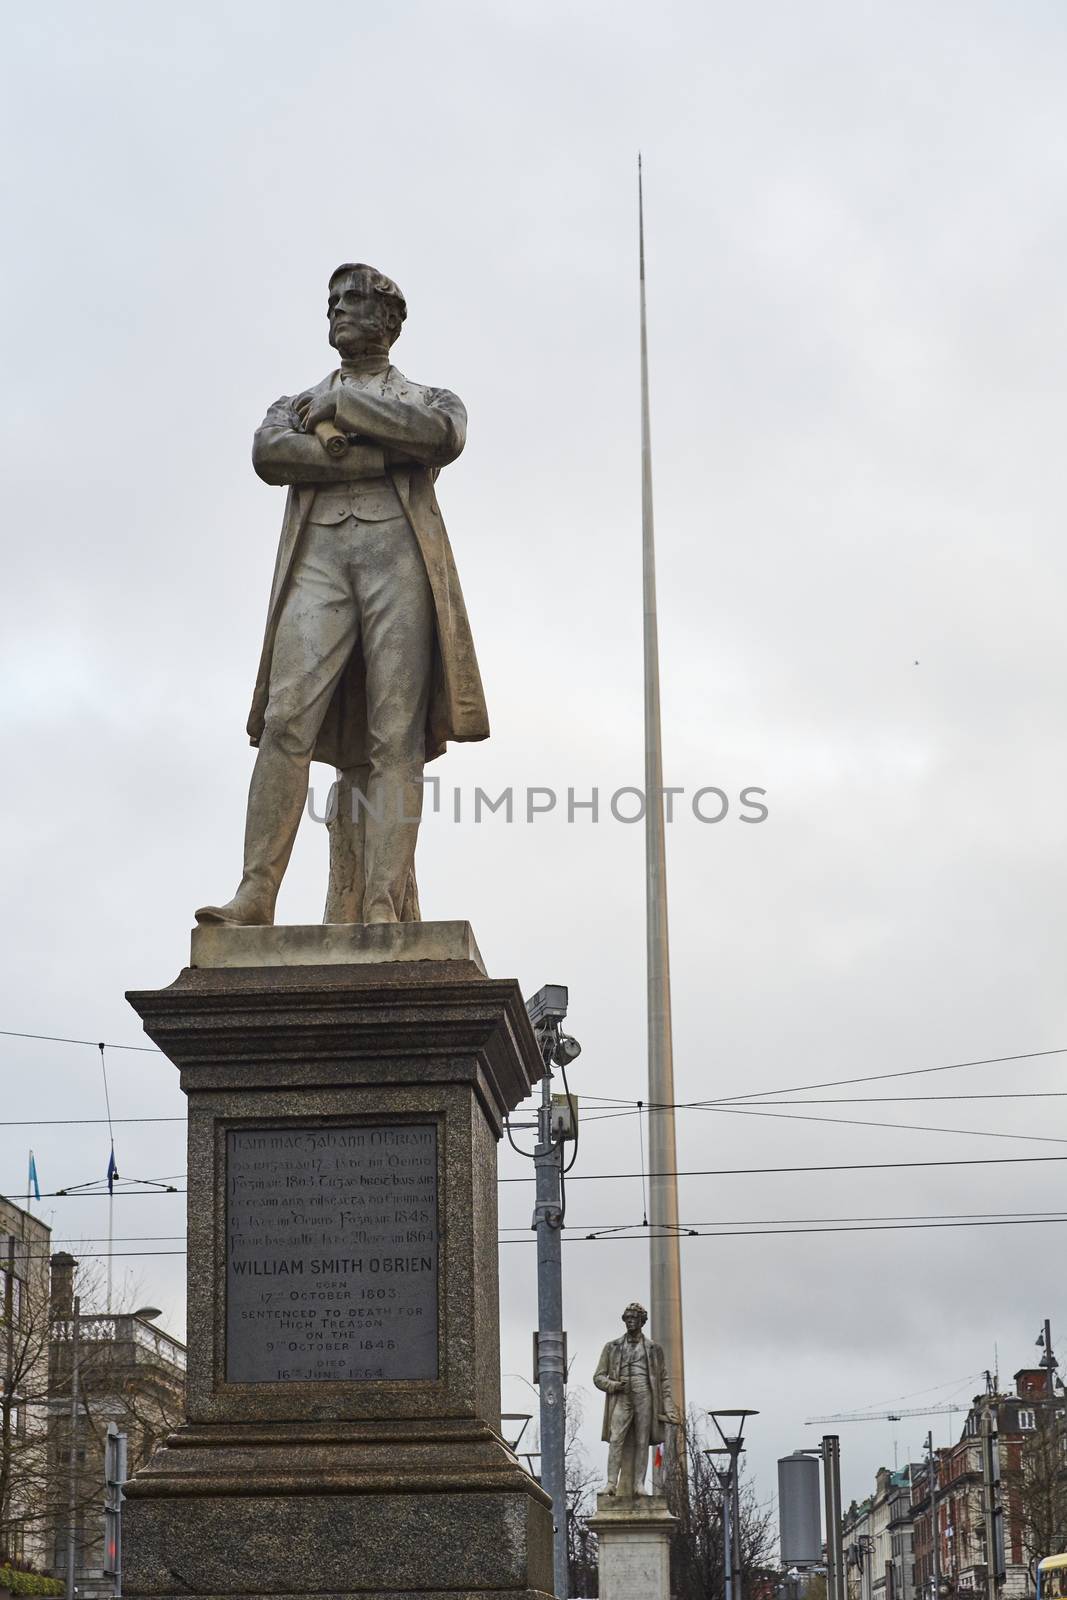 DUBLIN, IRELAND - JANUARY 05: Statue of William Smith O'Brien with Millennium Spire in the background, in overcast day. January 05, 2016 in Dublin